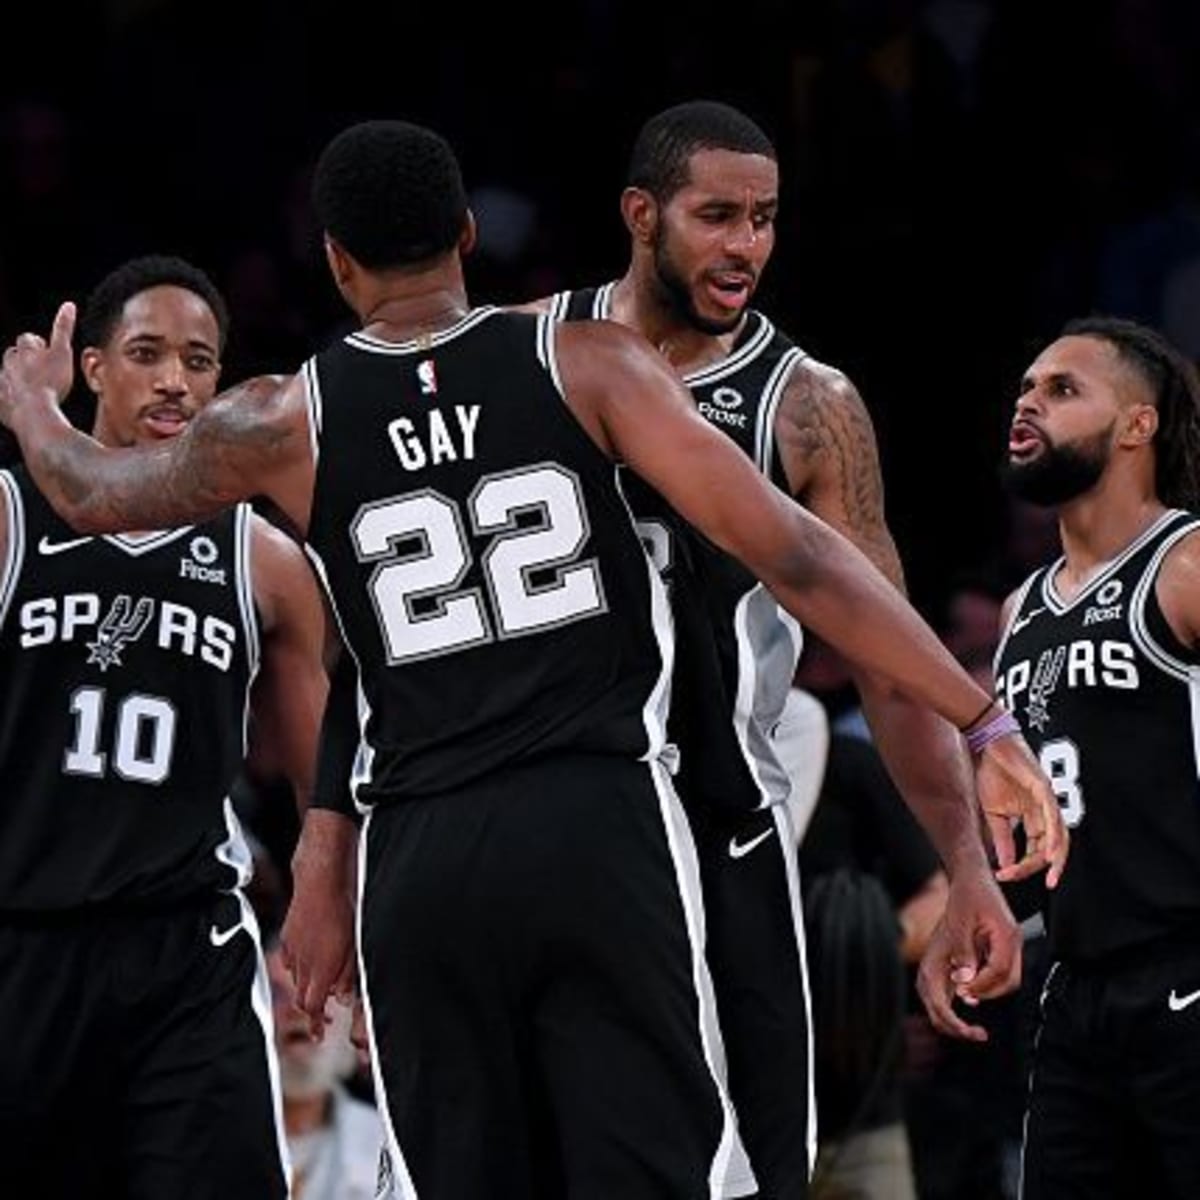 2019-20 Season shows that Rudy Gay is replaceable for Spurs